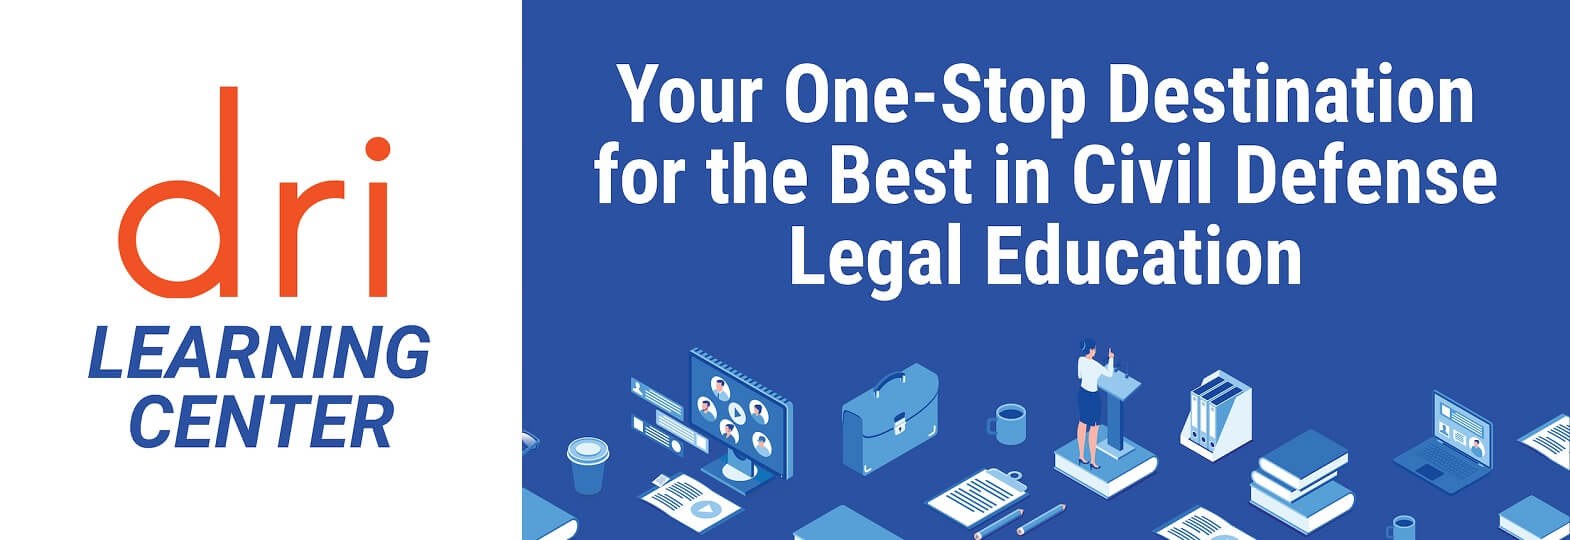 Your One-Stop Destination for the Best in Civil Defense Legal Education